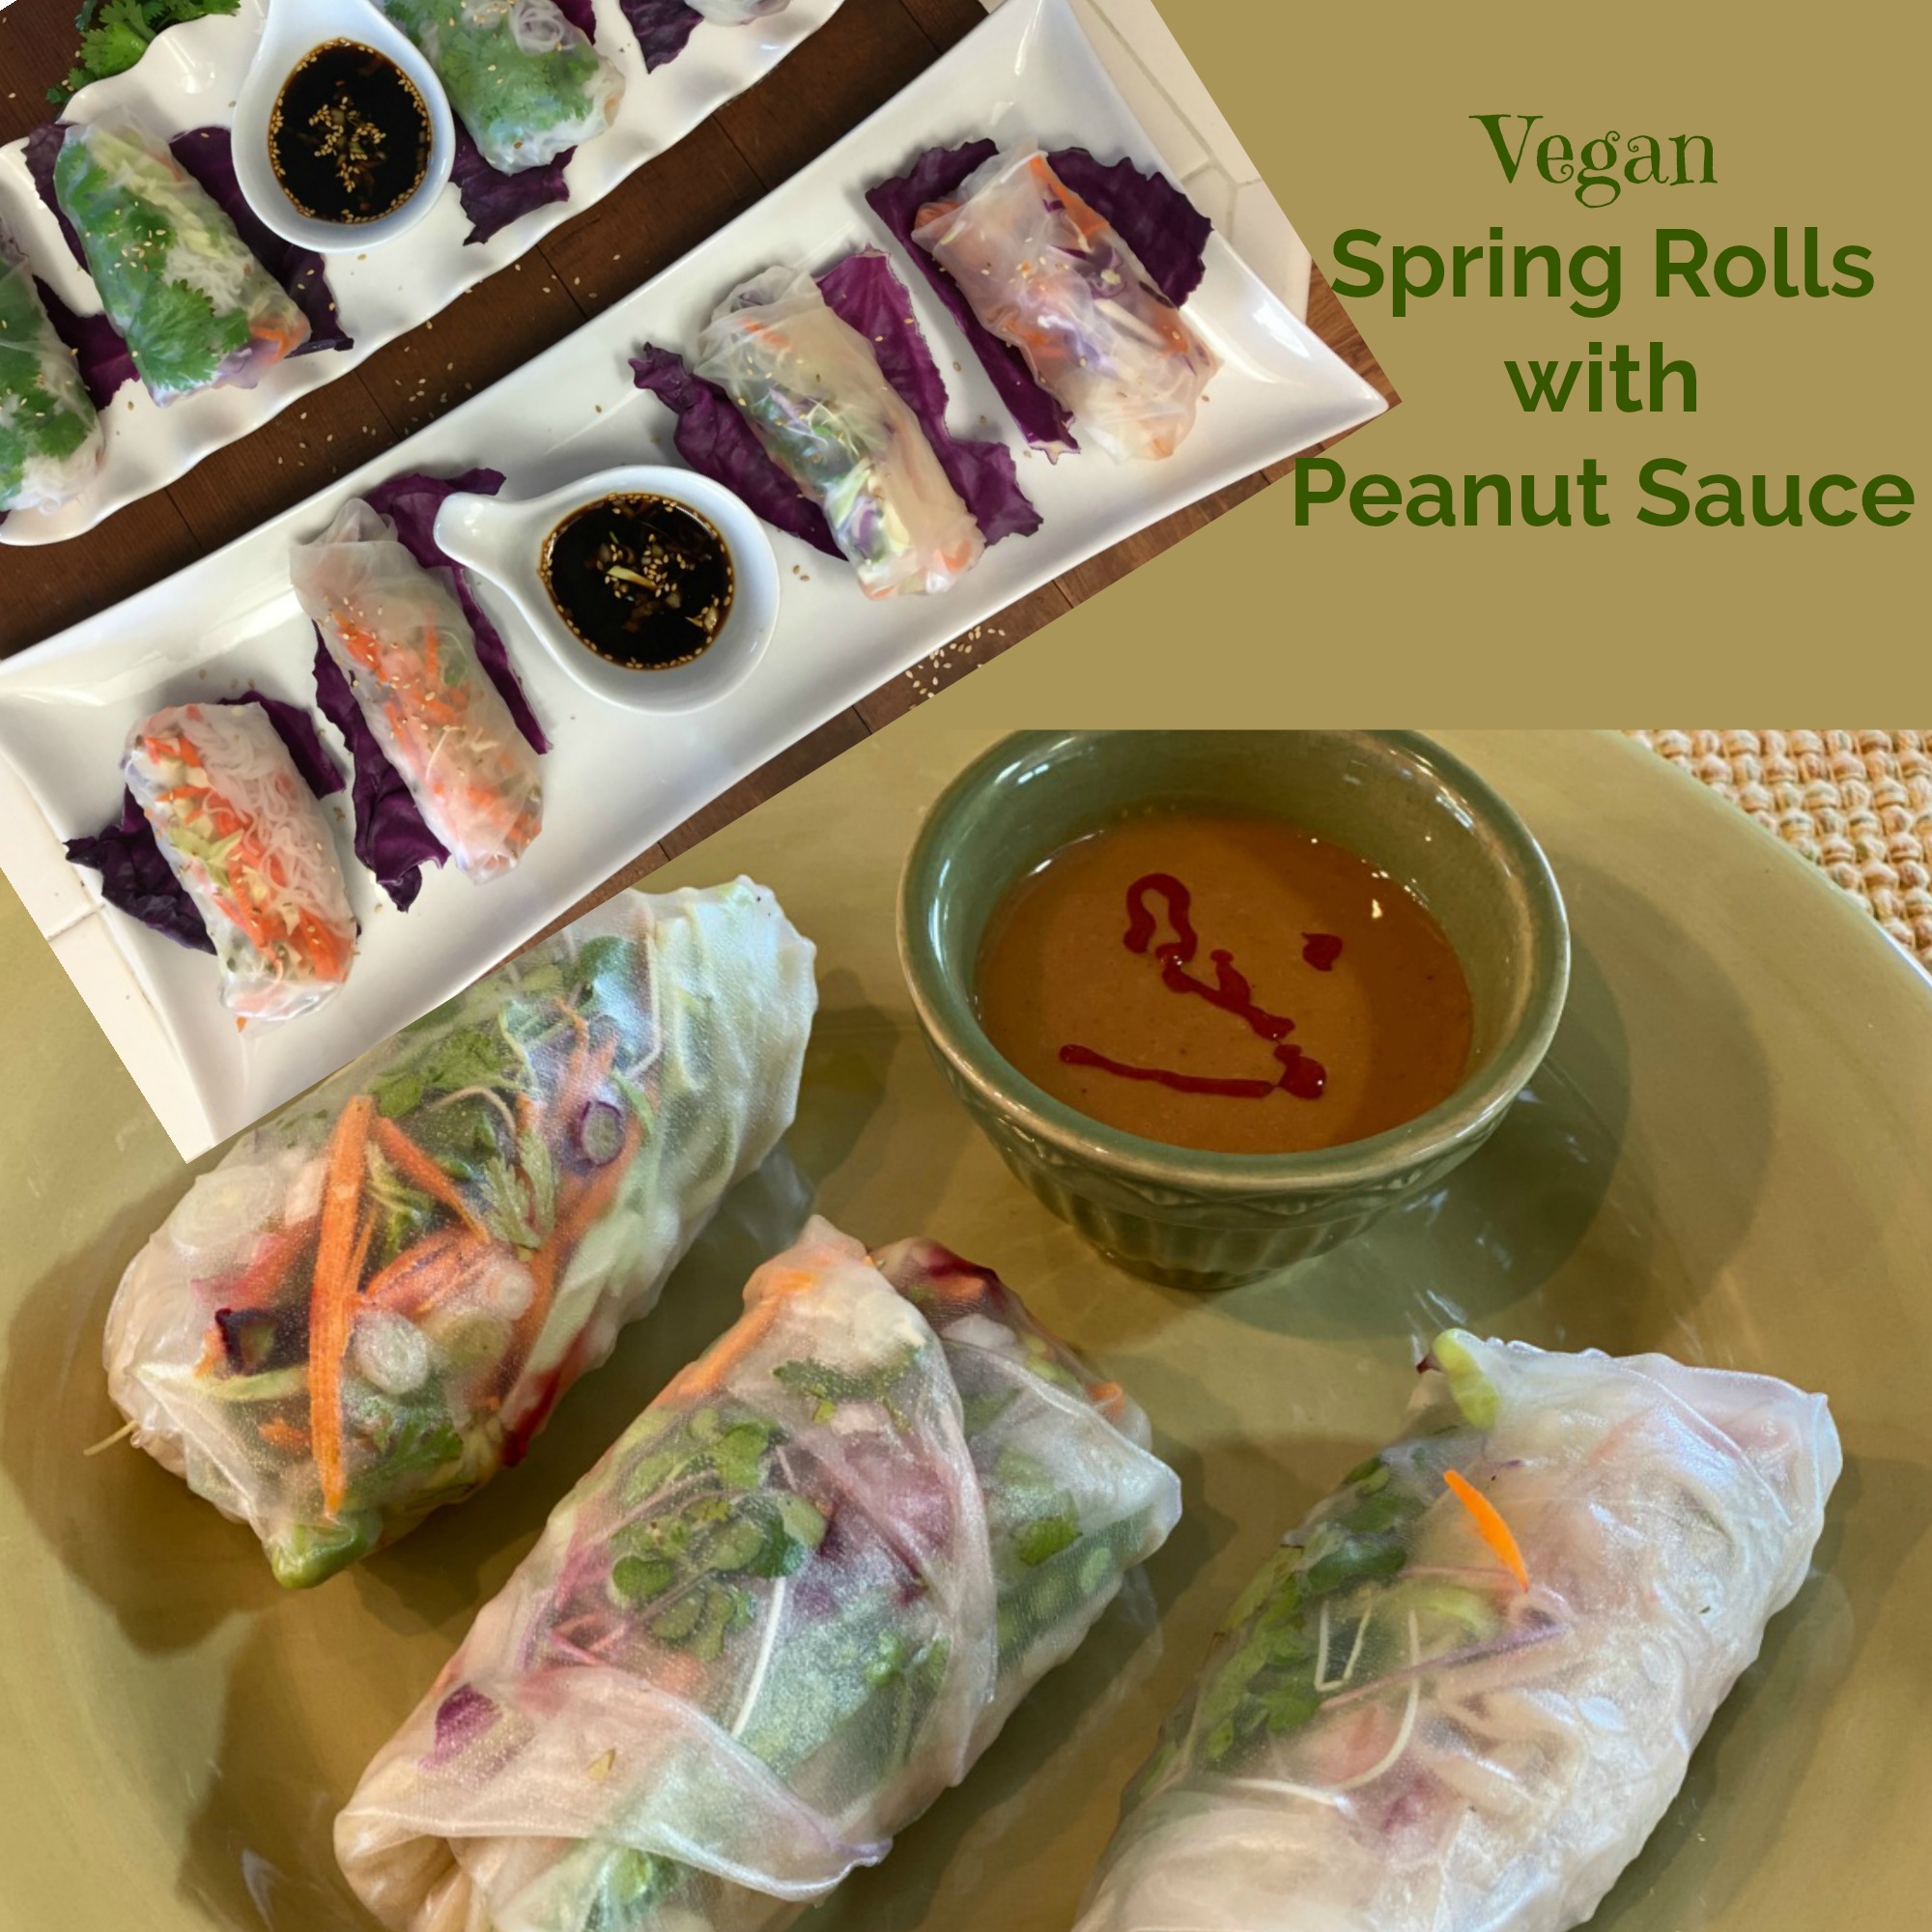 With these Vegan Spring Rolls with Peanut Sauce, you'll get lots of colorful veggies in a handy little wrap. Great as an appetizer or a meal. 